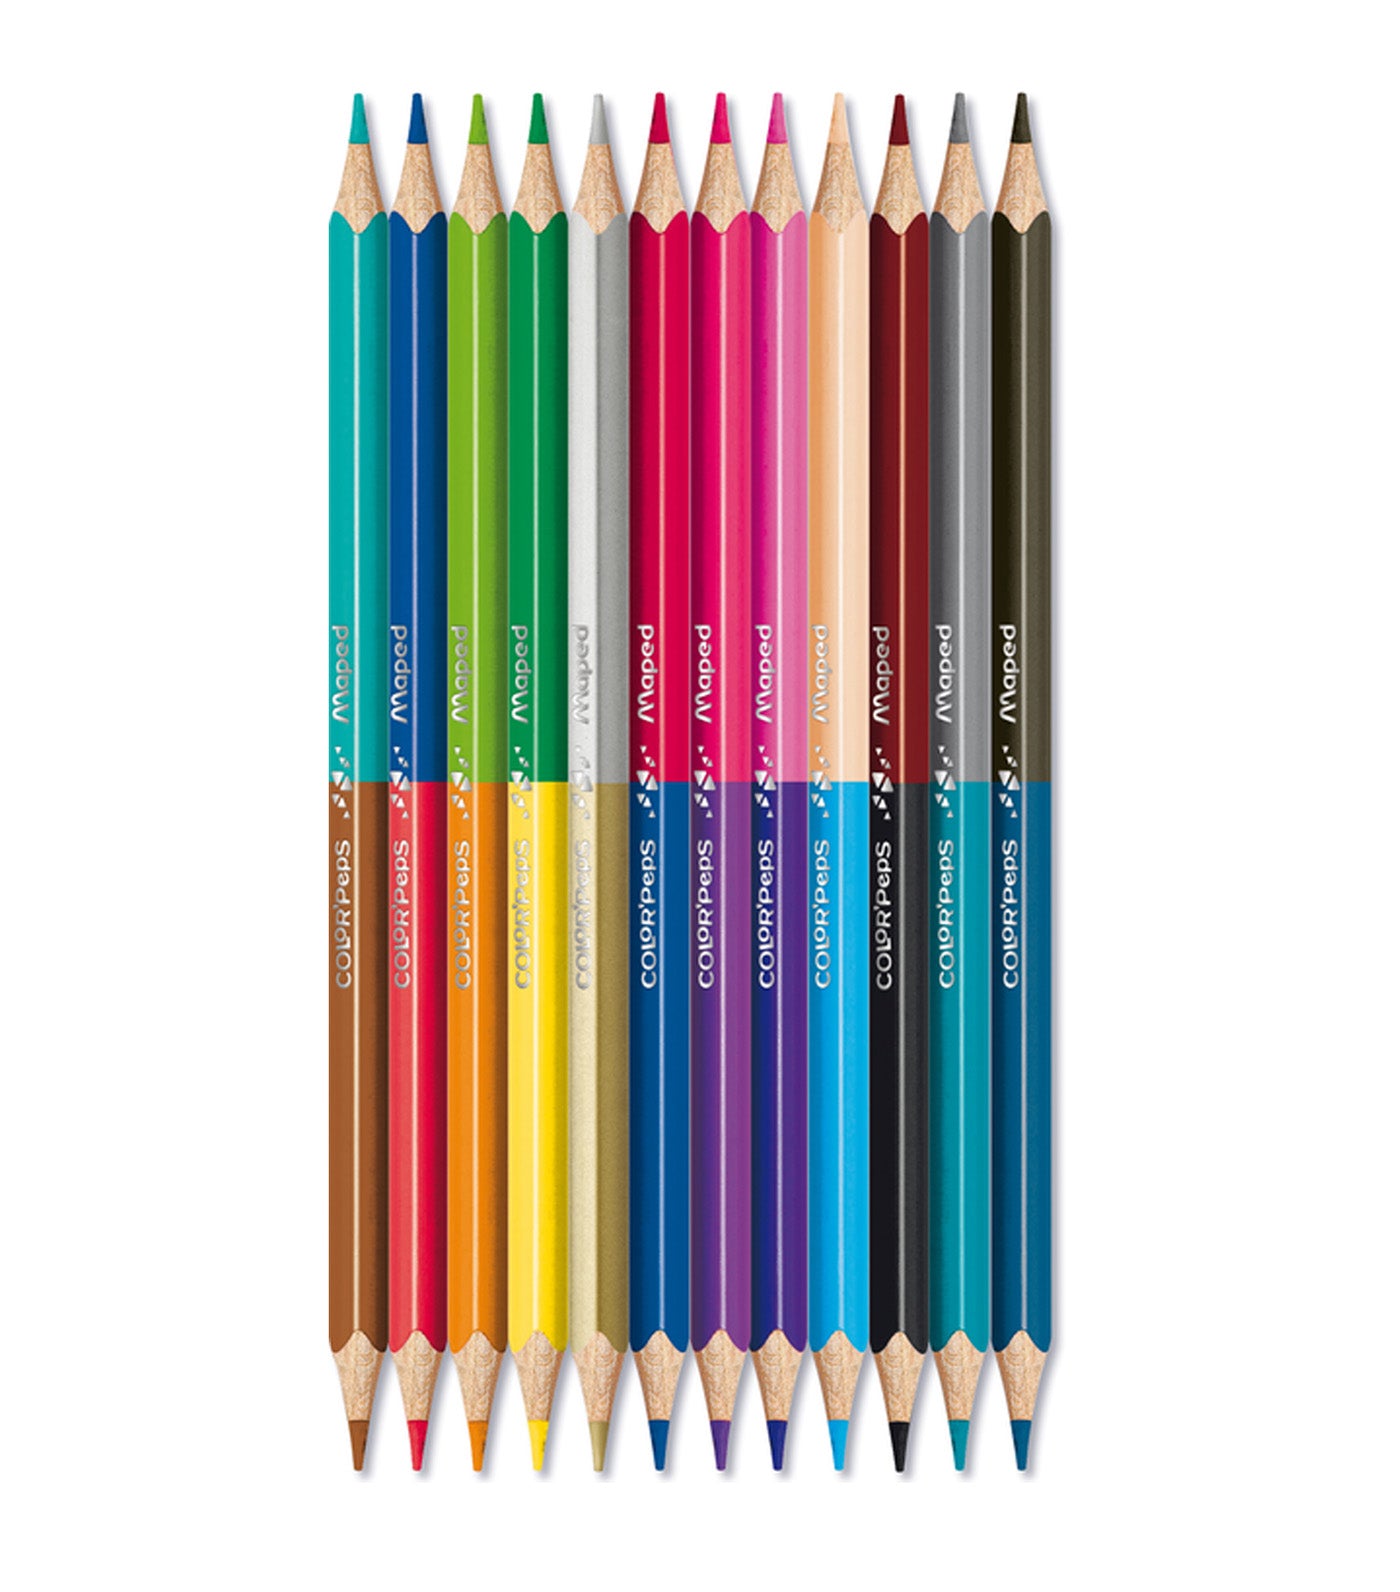 Color'Peps Duo Colored Pencils x 12 (24 Colors)